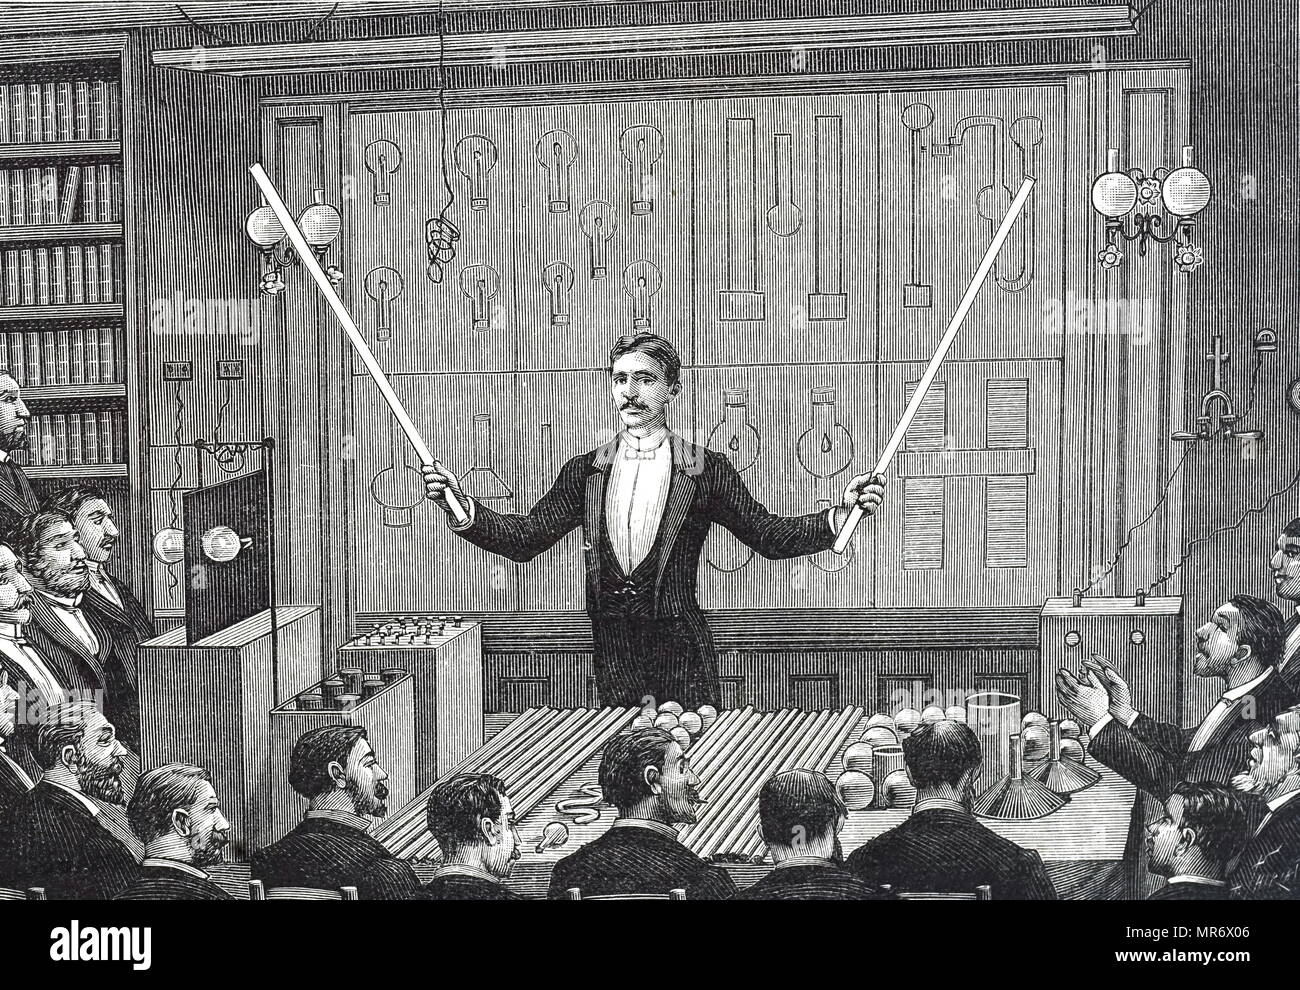 Engraving depicting Nikola Tesla addressing the Société Francaise de Physique and the International Society of Electricians. He is demonstrating electrode-less discharge with luminous discharge rods - the forerunner of fluorescent lighting. Nikola Tesla (1856-1943) a Serbian-American inventor, electrical engineer, mechanical engineer, physicist, and futurist. Dated 19th century Stock Photo